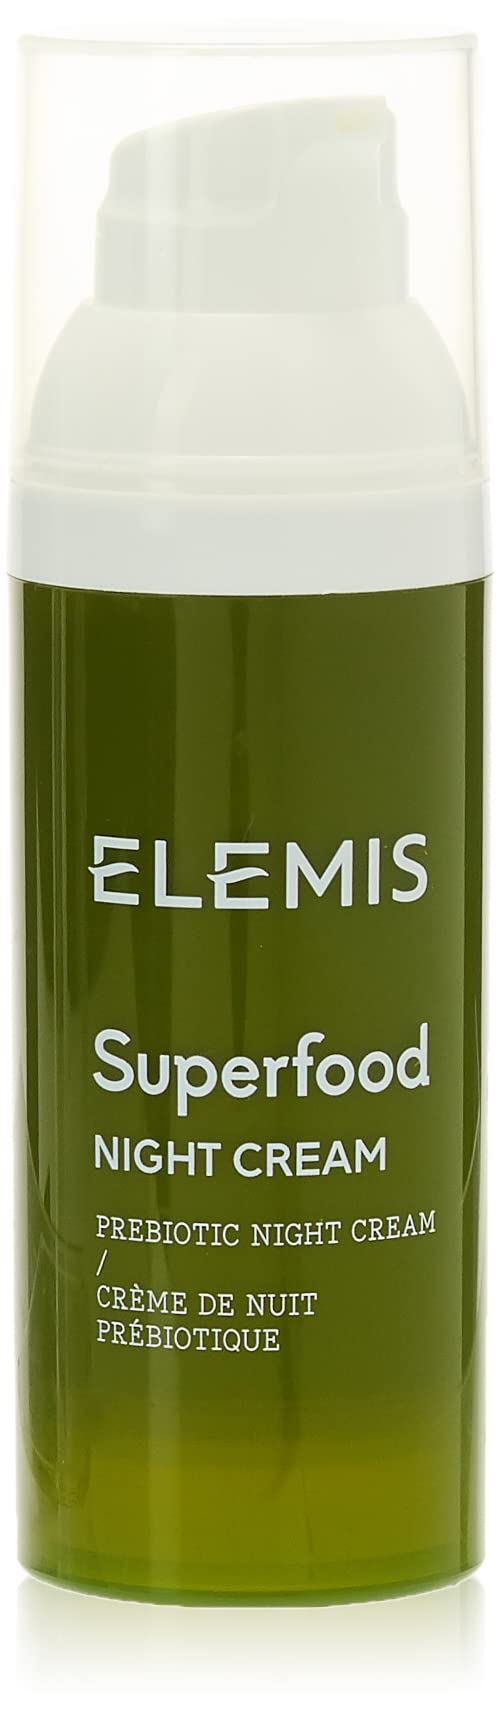 ELEMIS Superfood Night Cream, Pre-Biotic Night Face Cream to Hydrate, Restore and Replenish, Intensely Nourishing Night Moisturiser for Smoother, Softer Skin and a Healthy-Looking Glow, 50ml